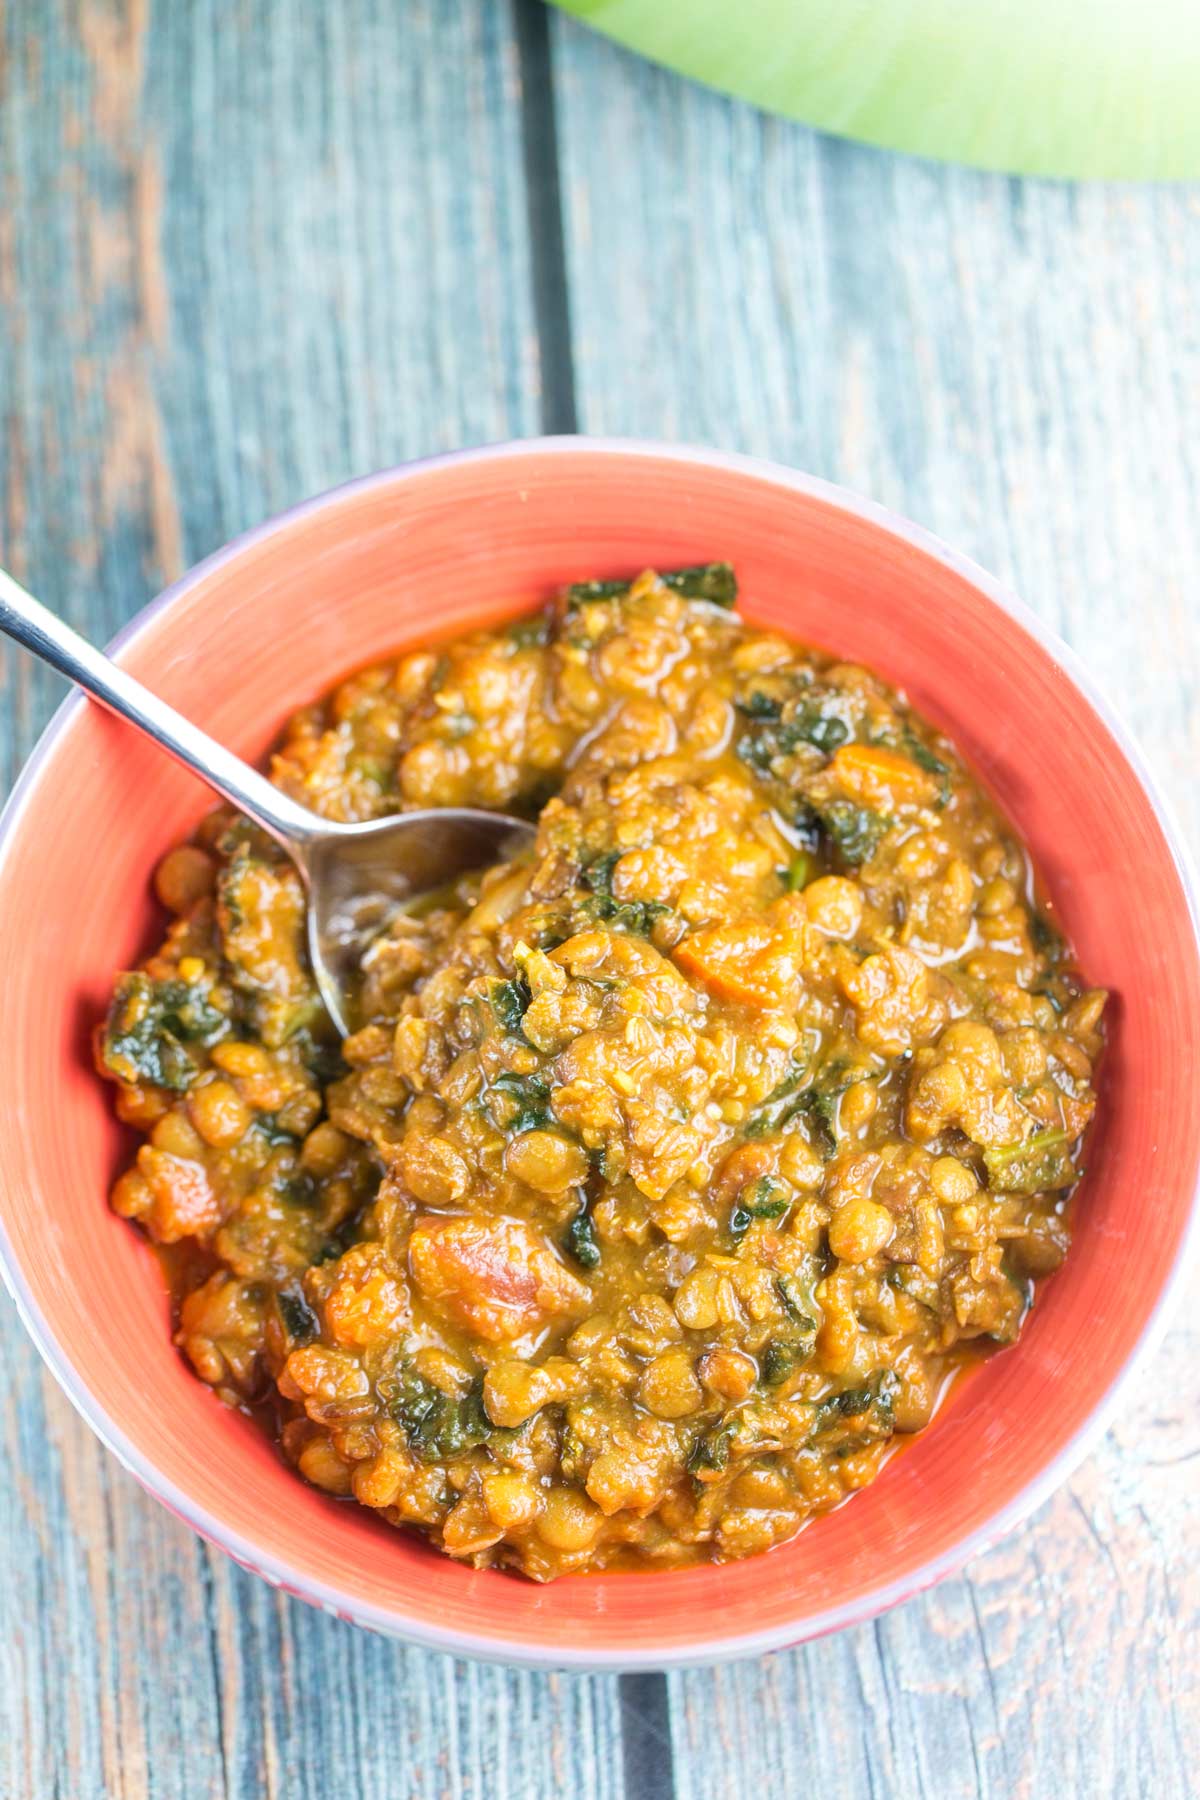 a bowl of curried lentil soup with kale on a wooden plank background